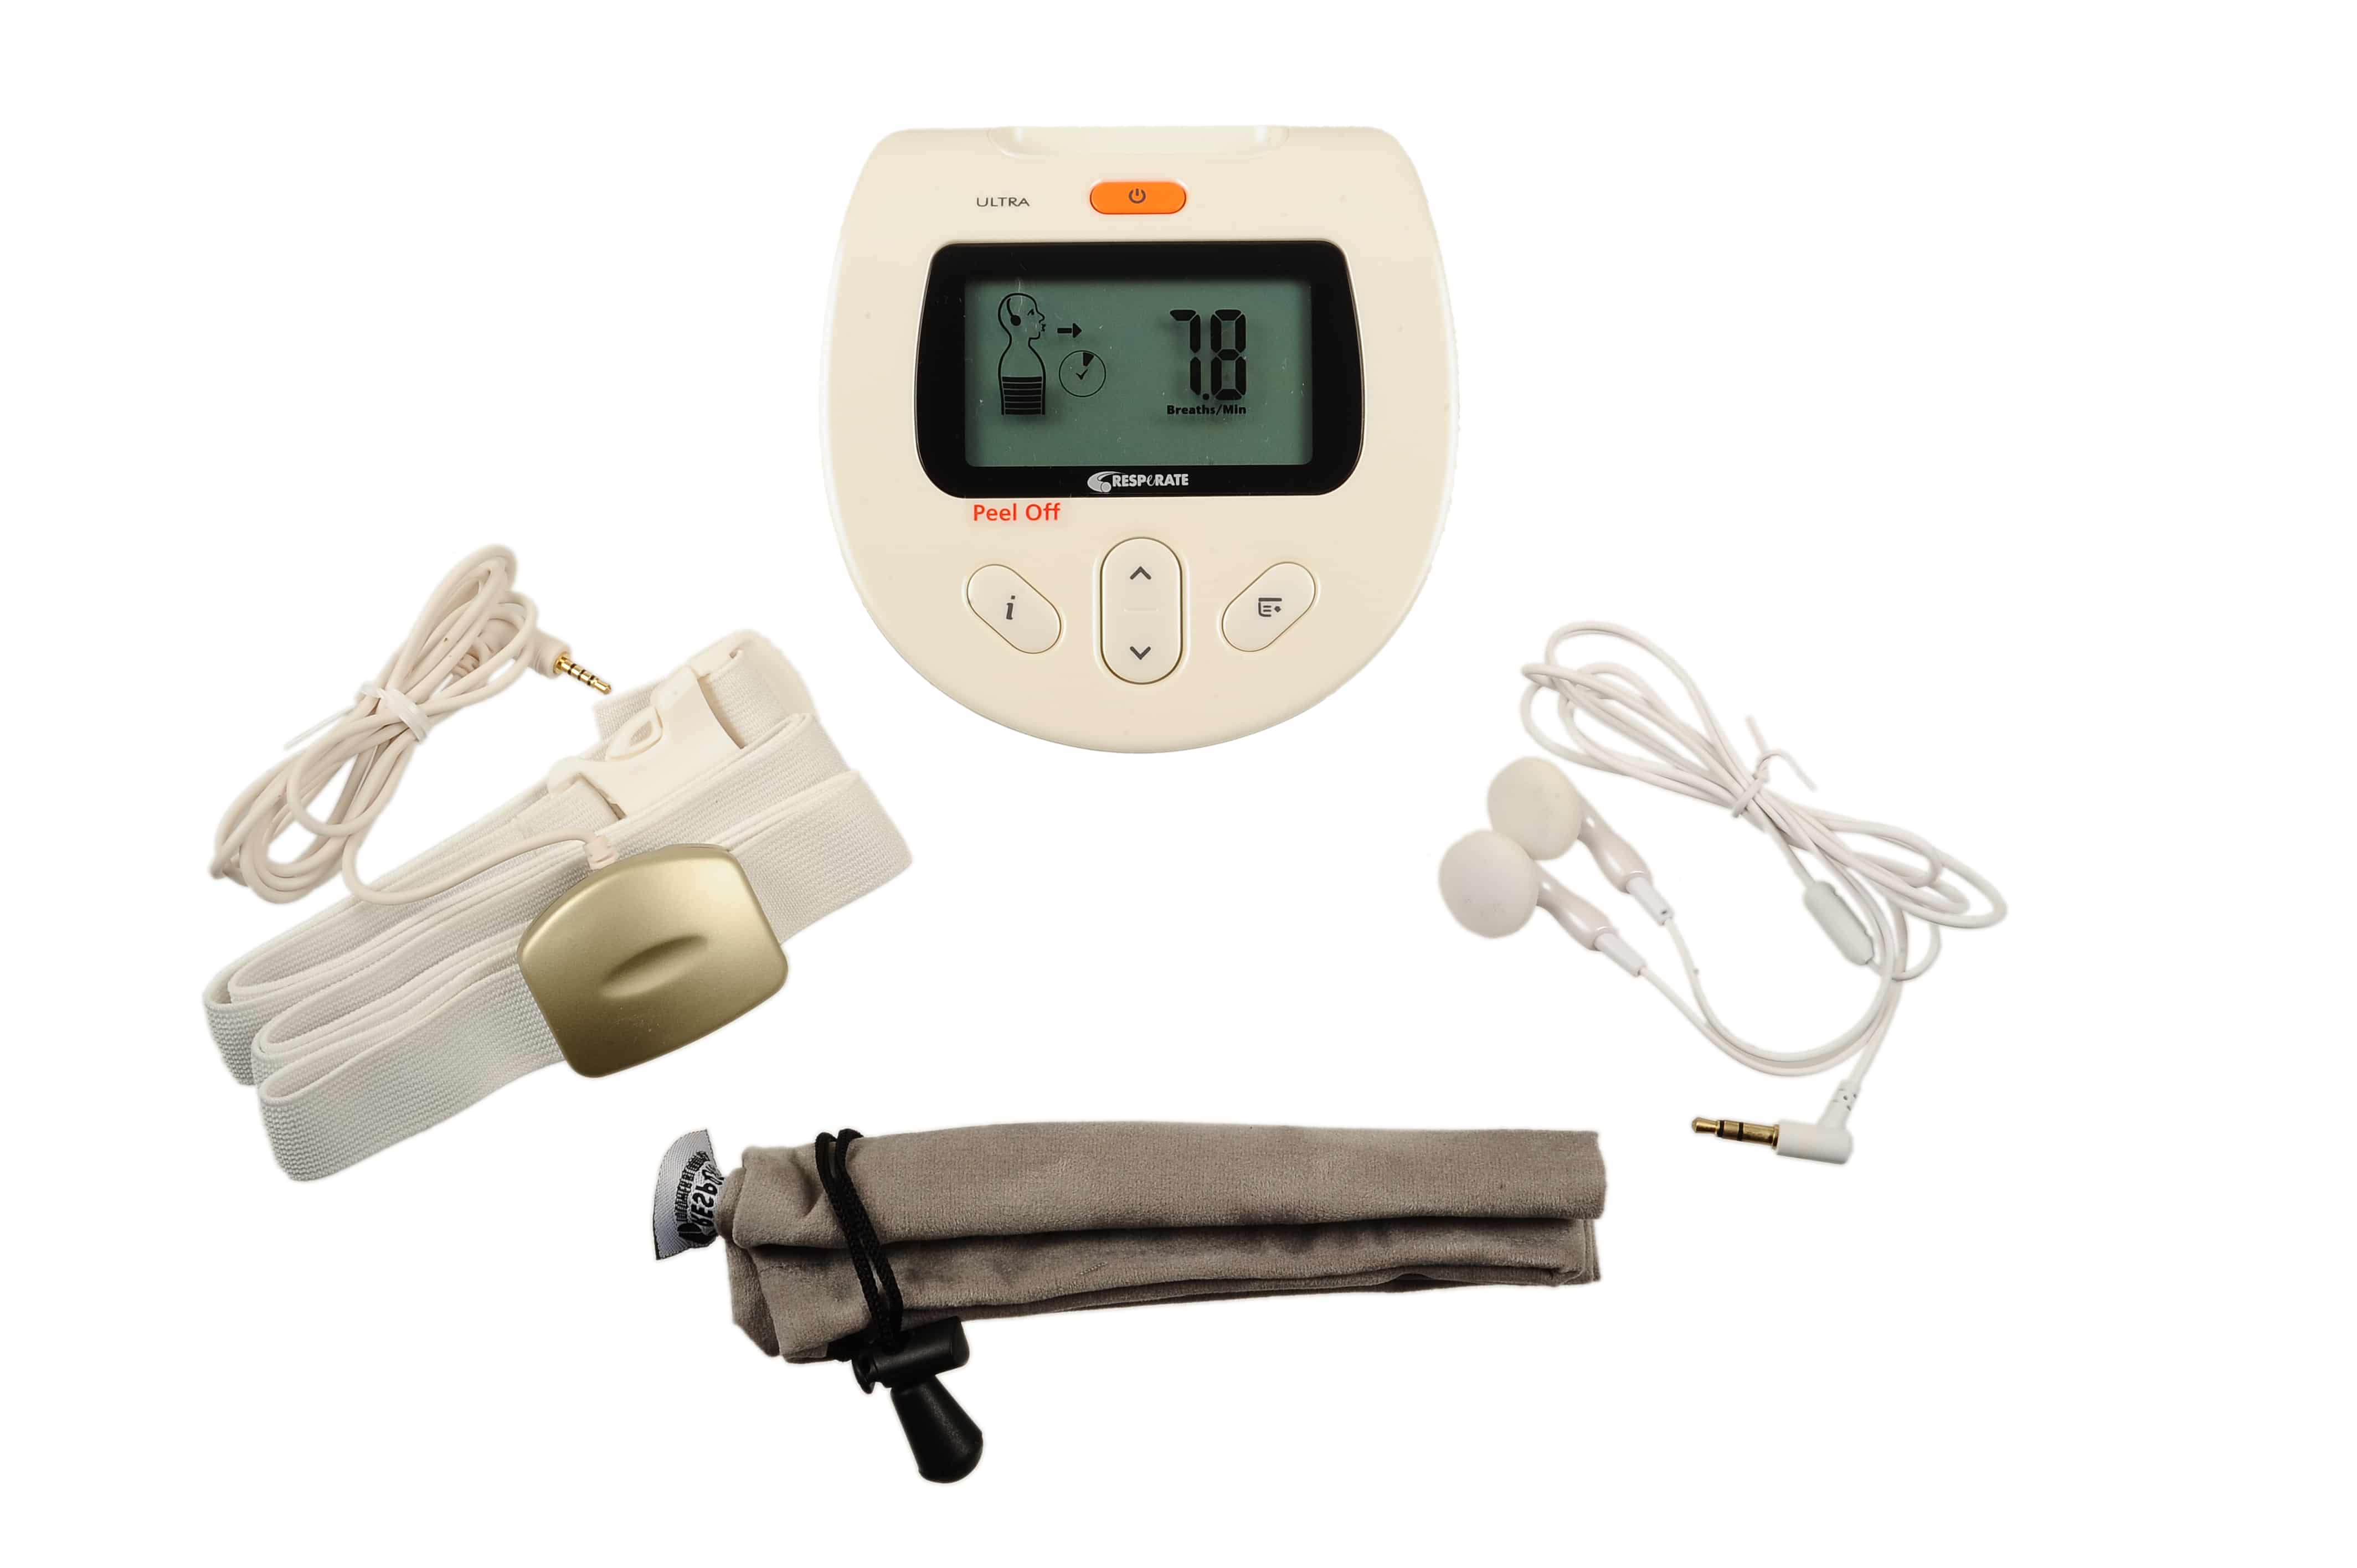 RESPeRATE  Patented Technology To Lower Blood Pressure